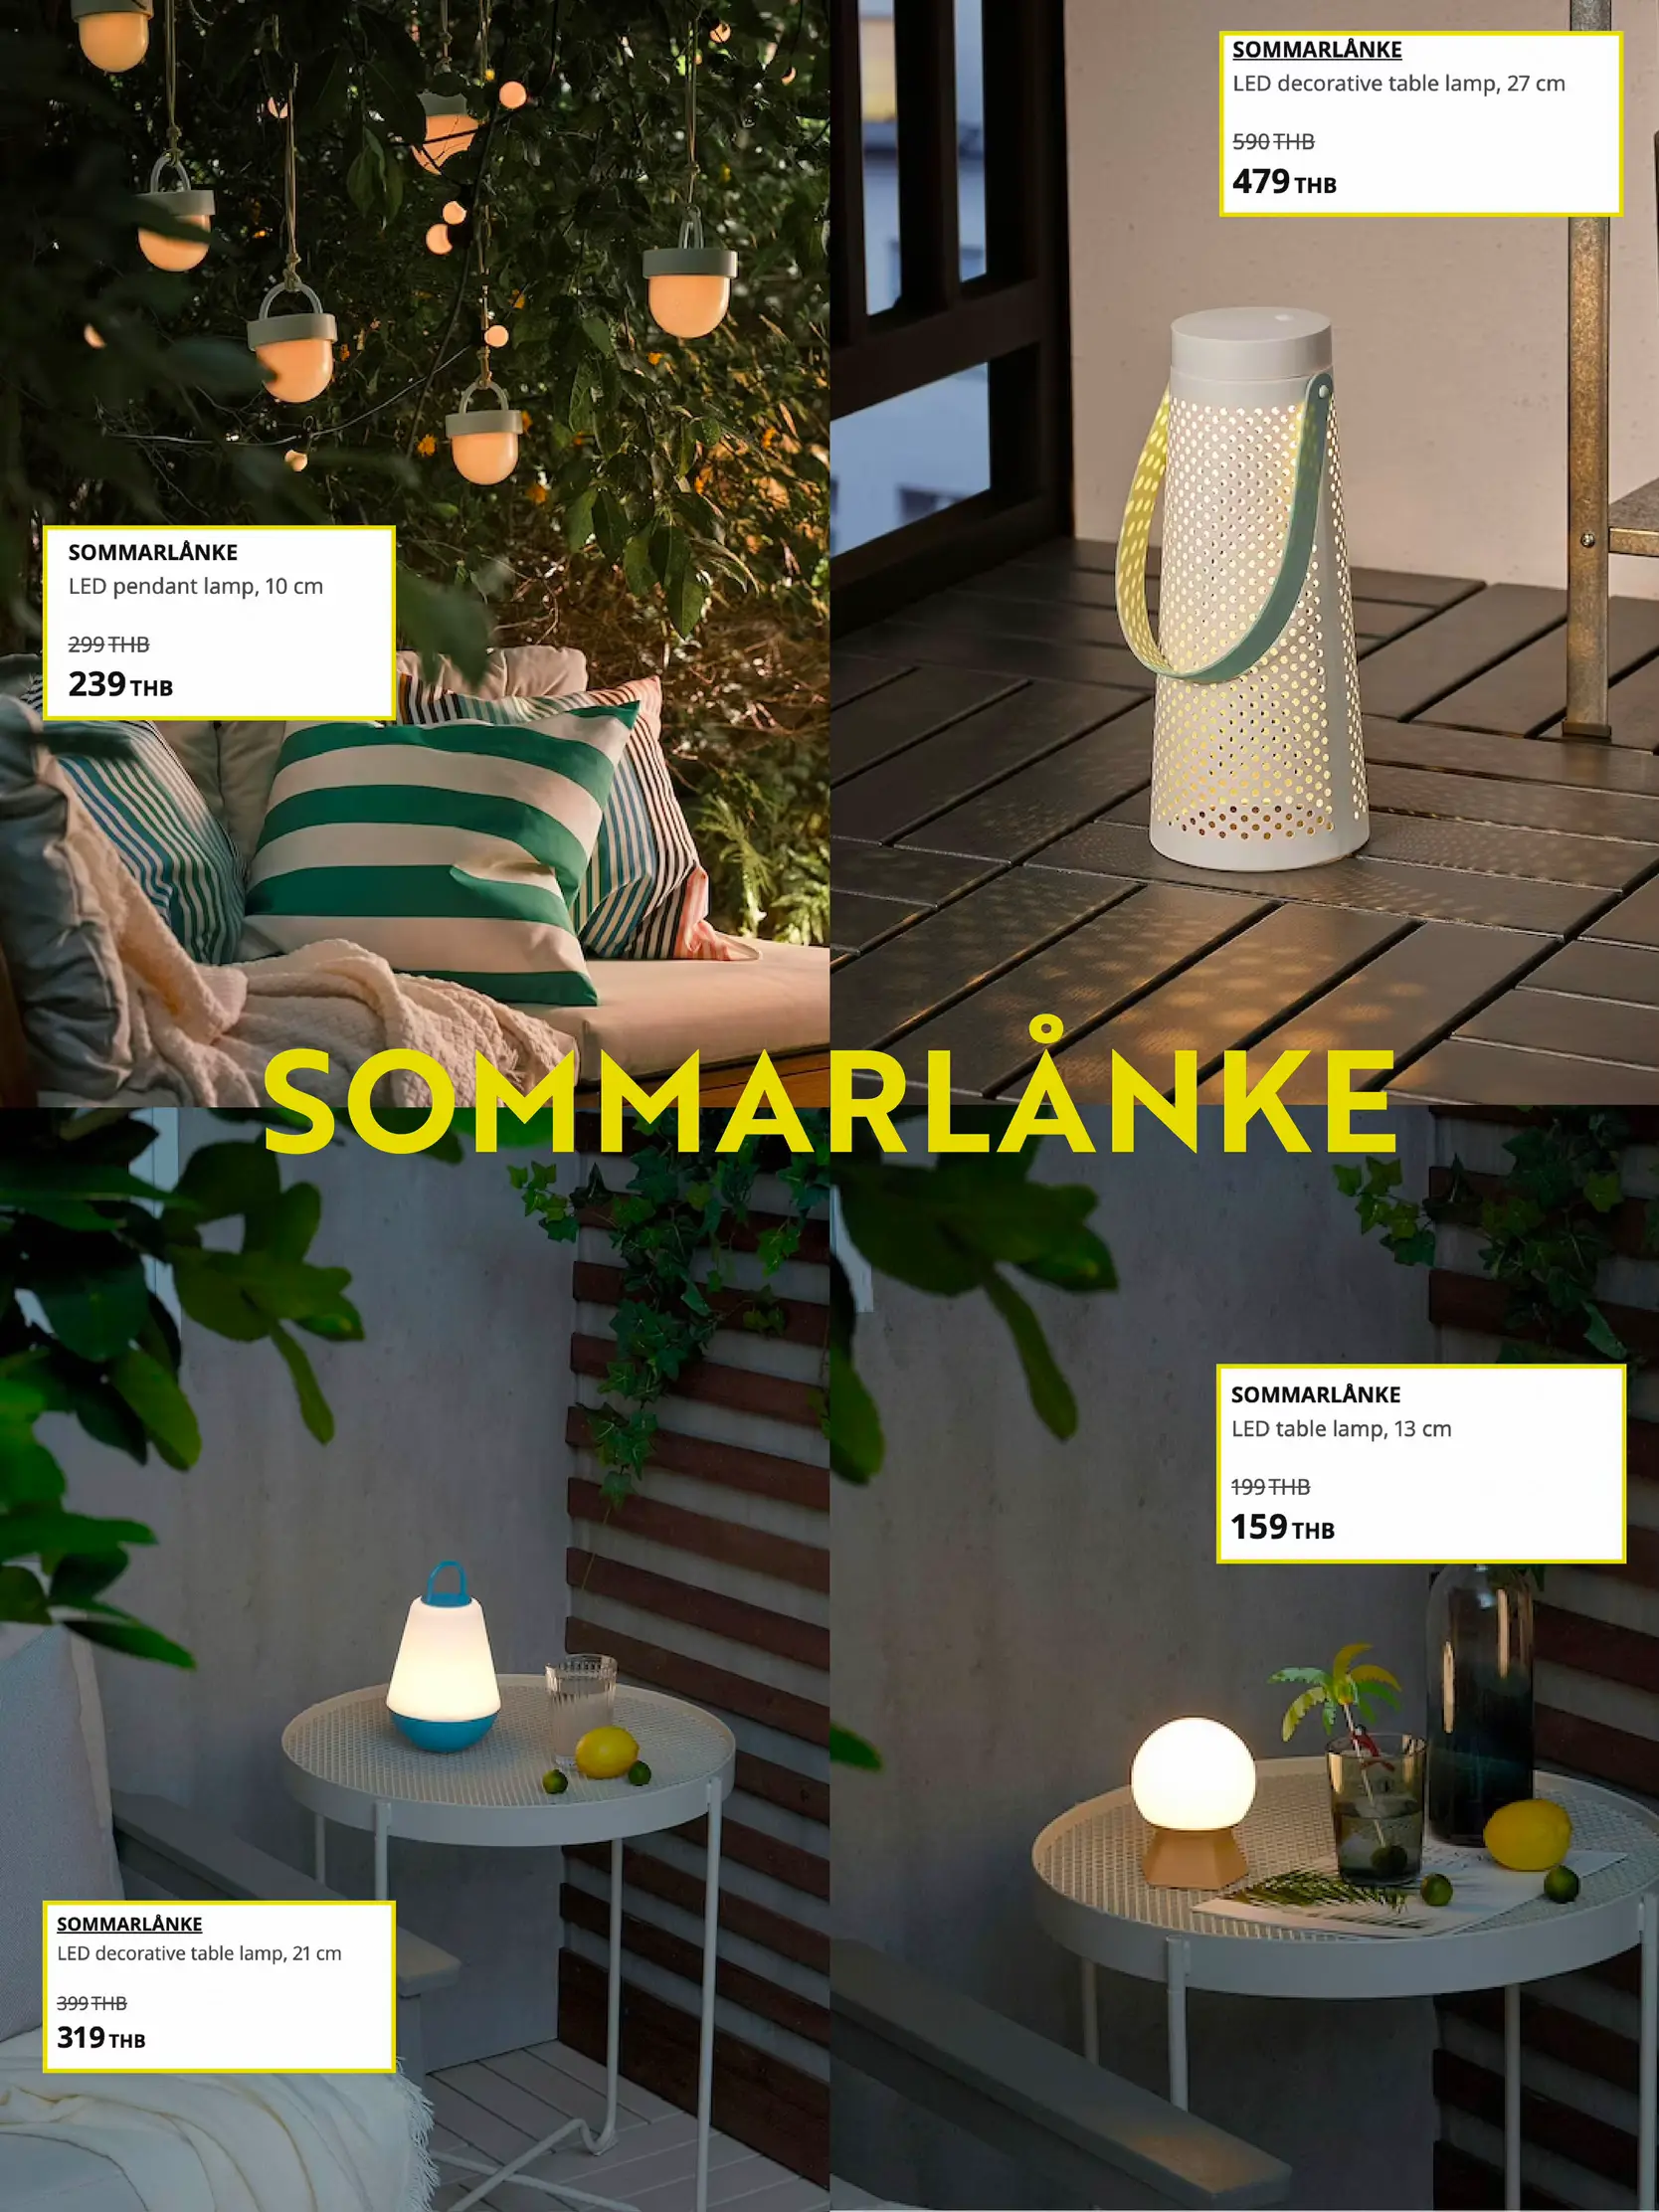 SOMMARLÅNKE LED table lamp, yellow mini/battery operated outdoor, 47/8 -  IKEA